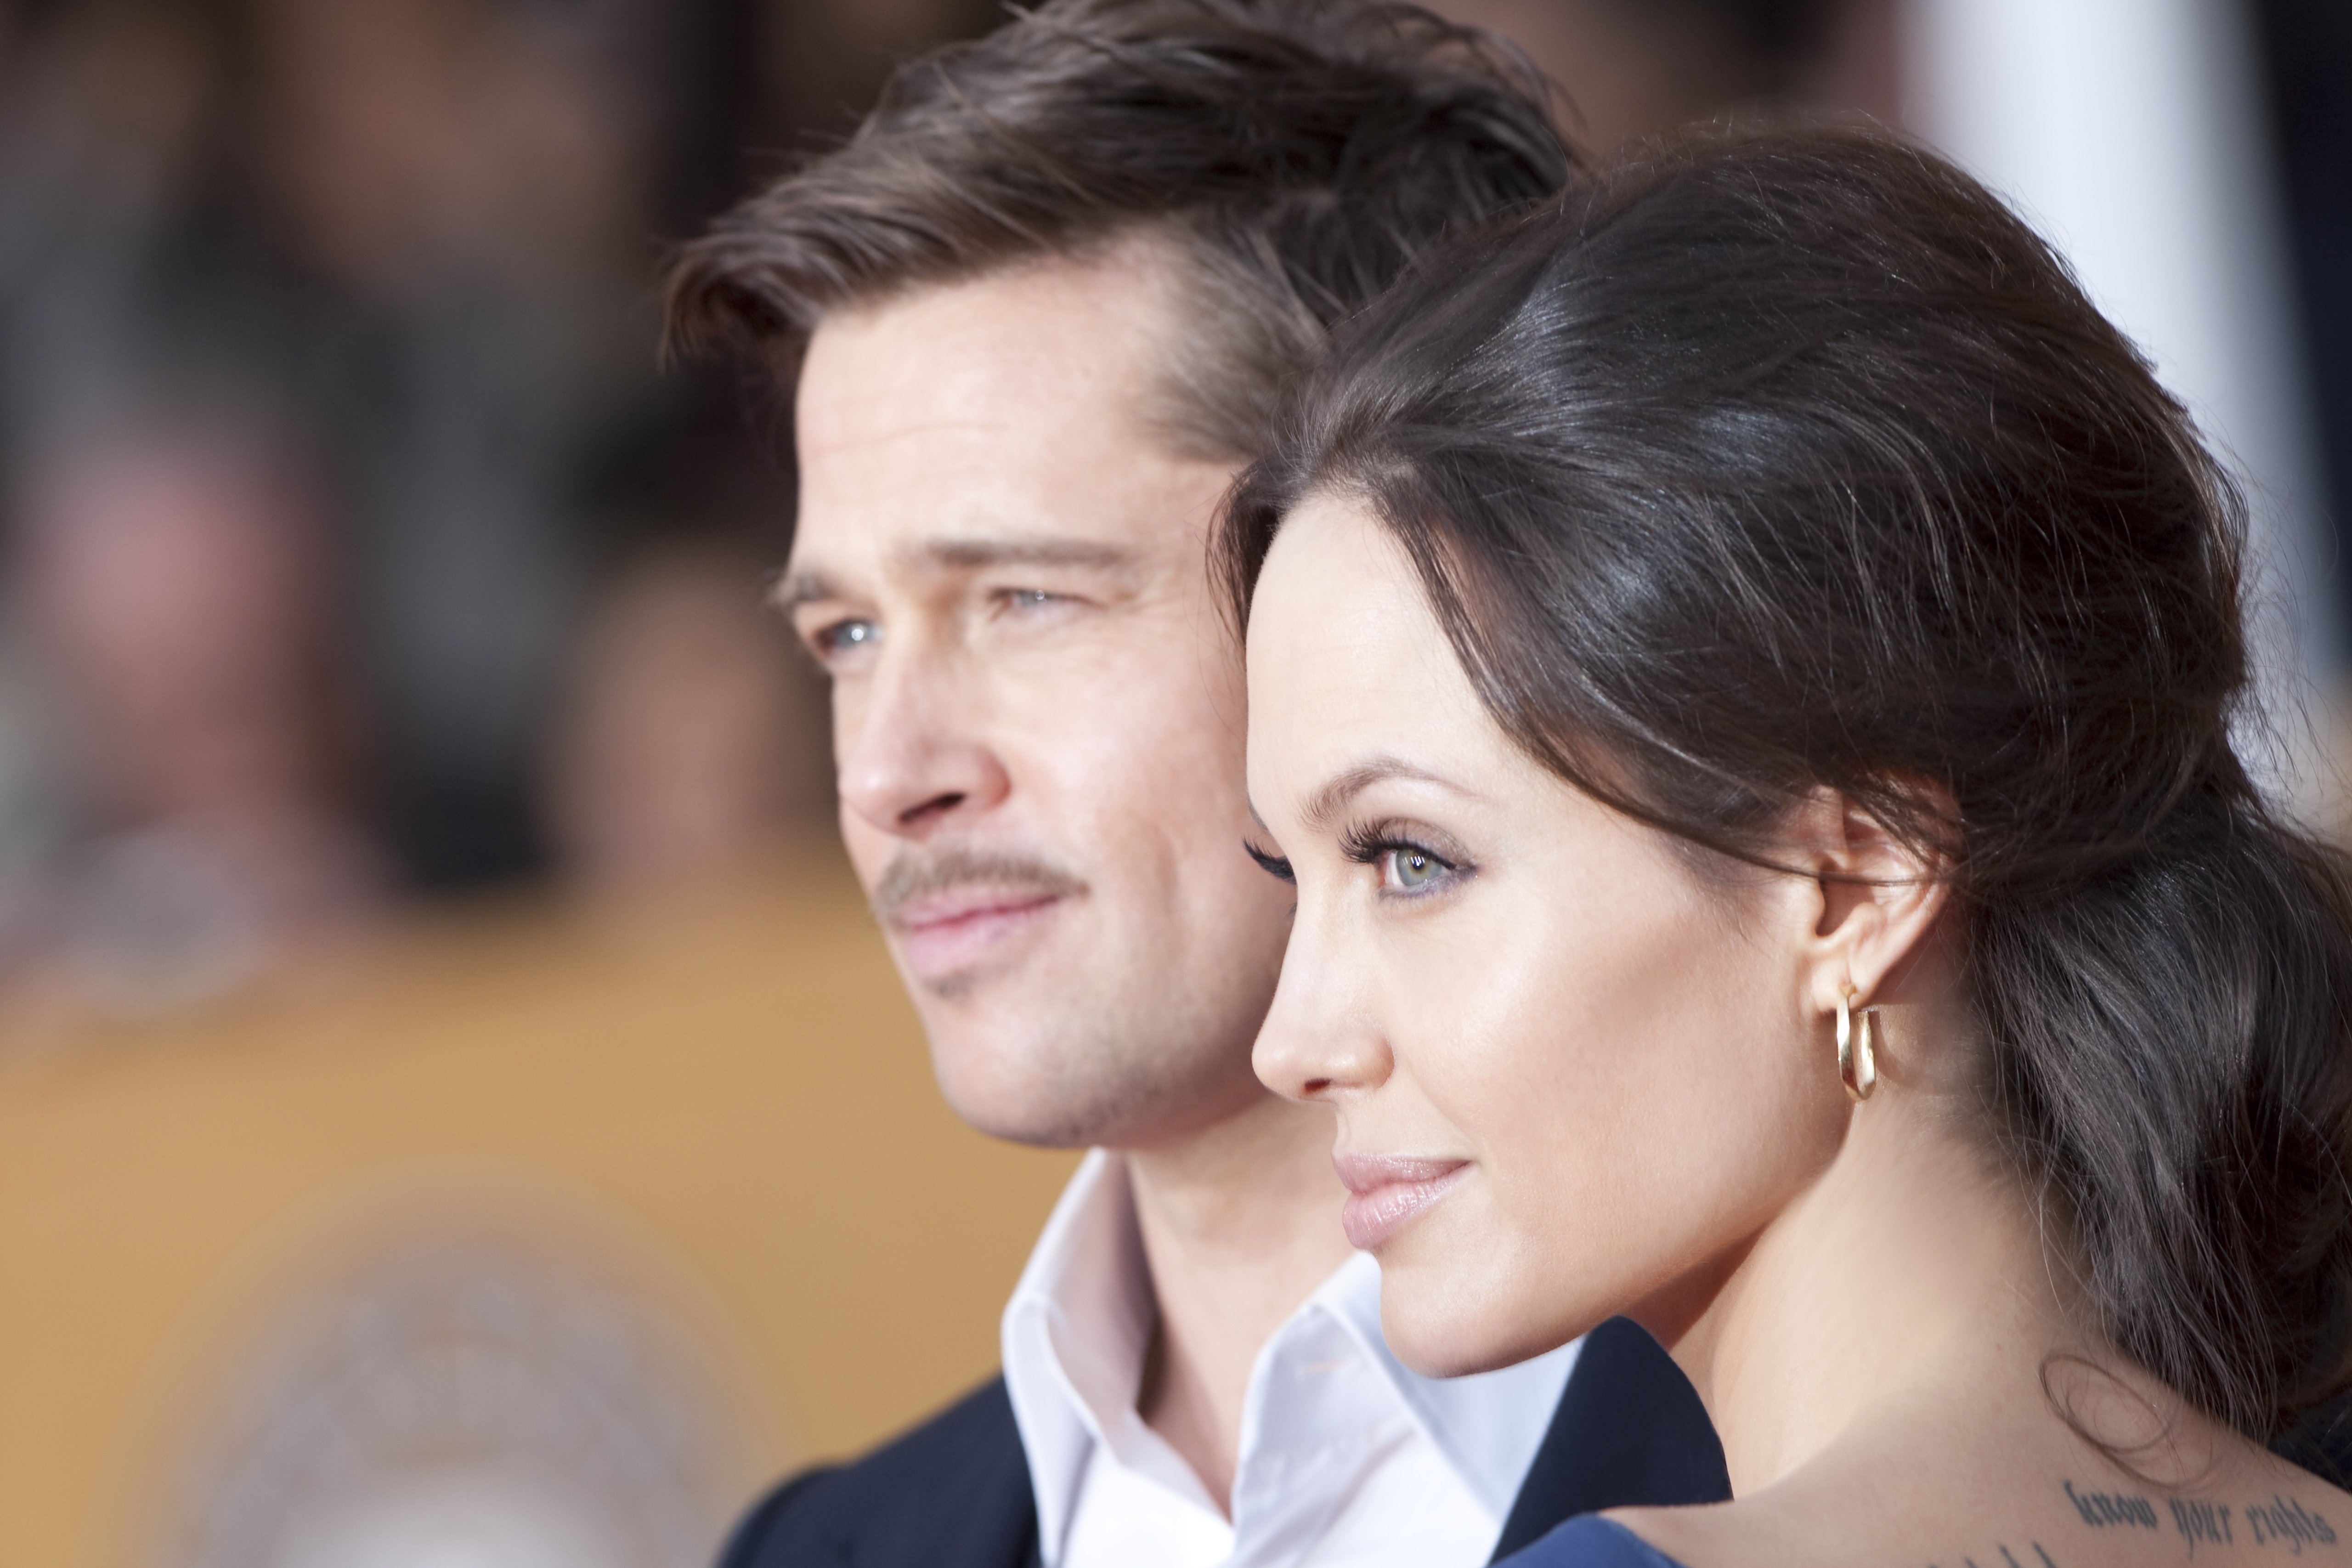 Angelina Jolie has filed for divorce from husband of two years Brad Pitt, a source familiar with the filing says. Credit: Michael Buckner, WireImage.com for Turner Network Television